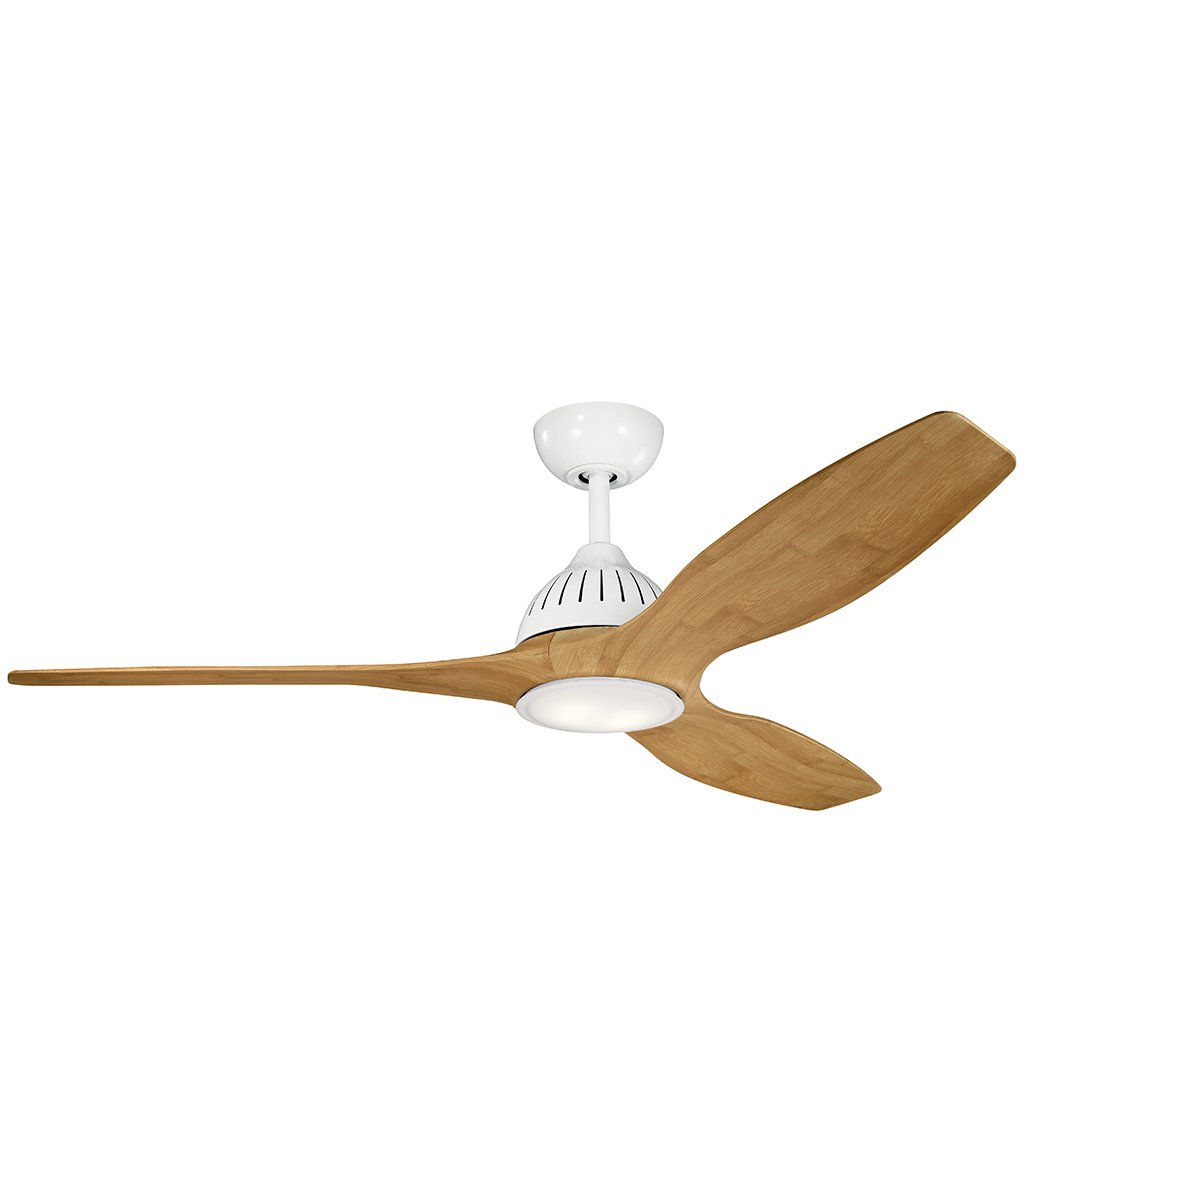 This 60in. Jace LED ceiling fan in White offers smooth airflow and ambient light in a style that's updated for today. The curved, sweeping blades add an architectural element to any room: traditional, modern or somewhere in-between.